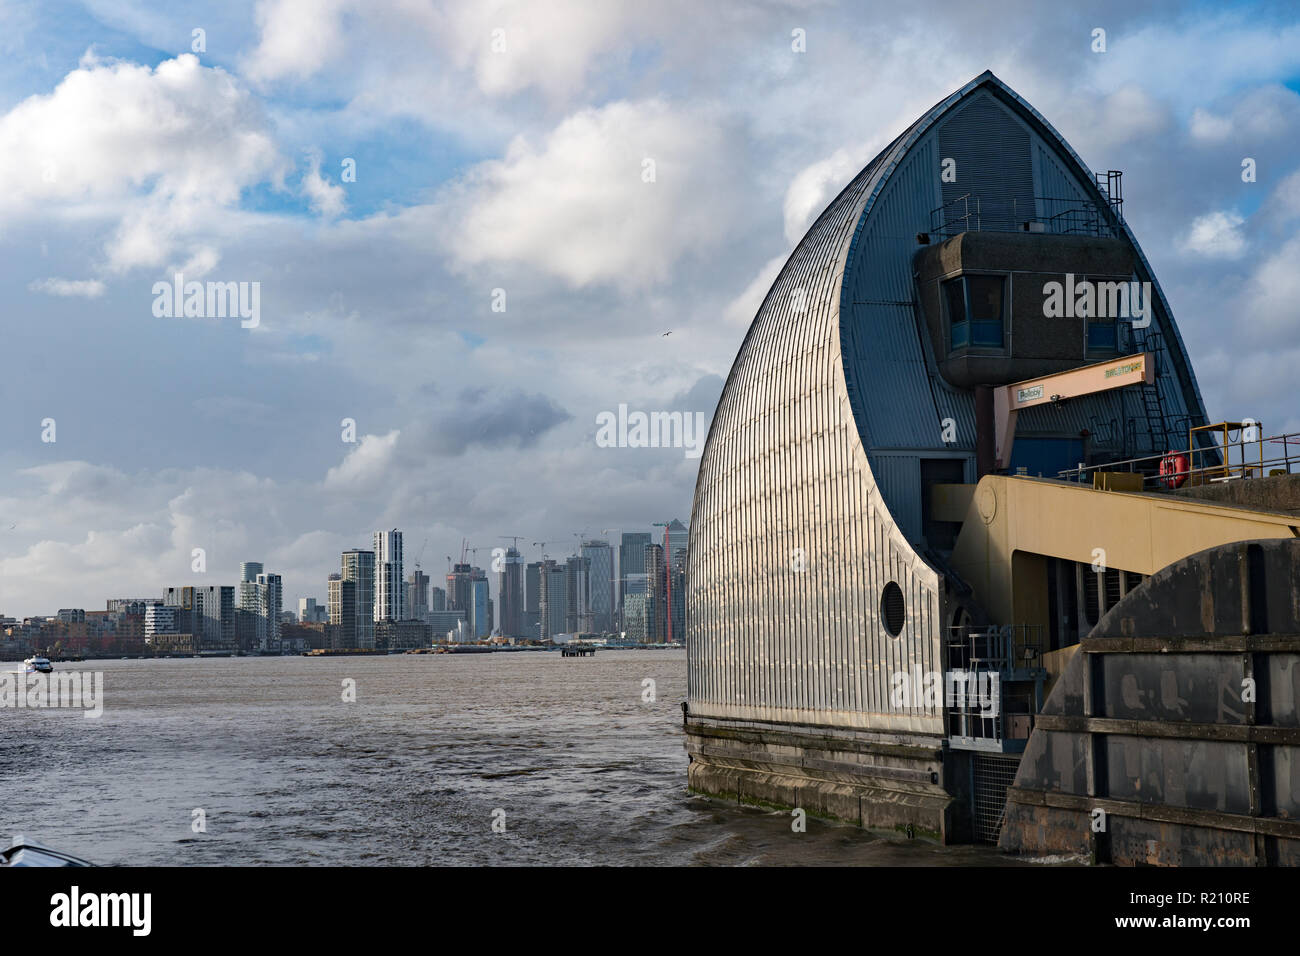 The Thames Barrier. From the Open City Thames Architecture Tour East. Photo date: Saturday, November 10, 2018. Photo: Roger Garfield/Alamy Stock Photo